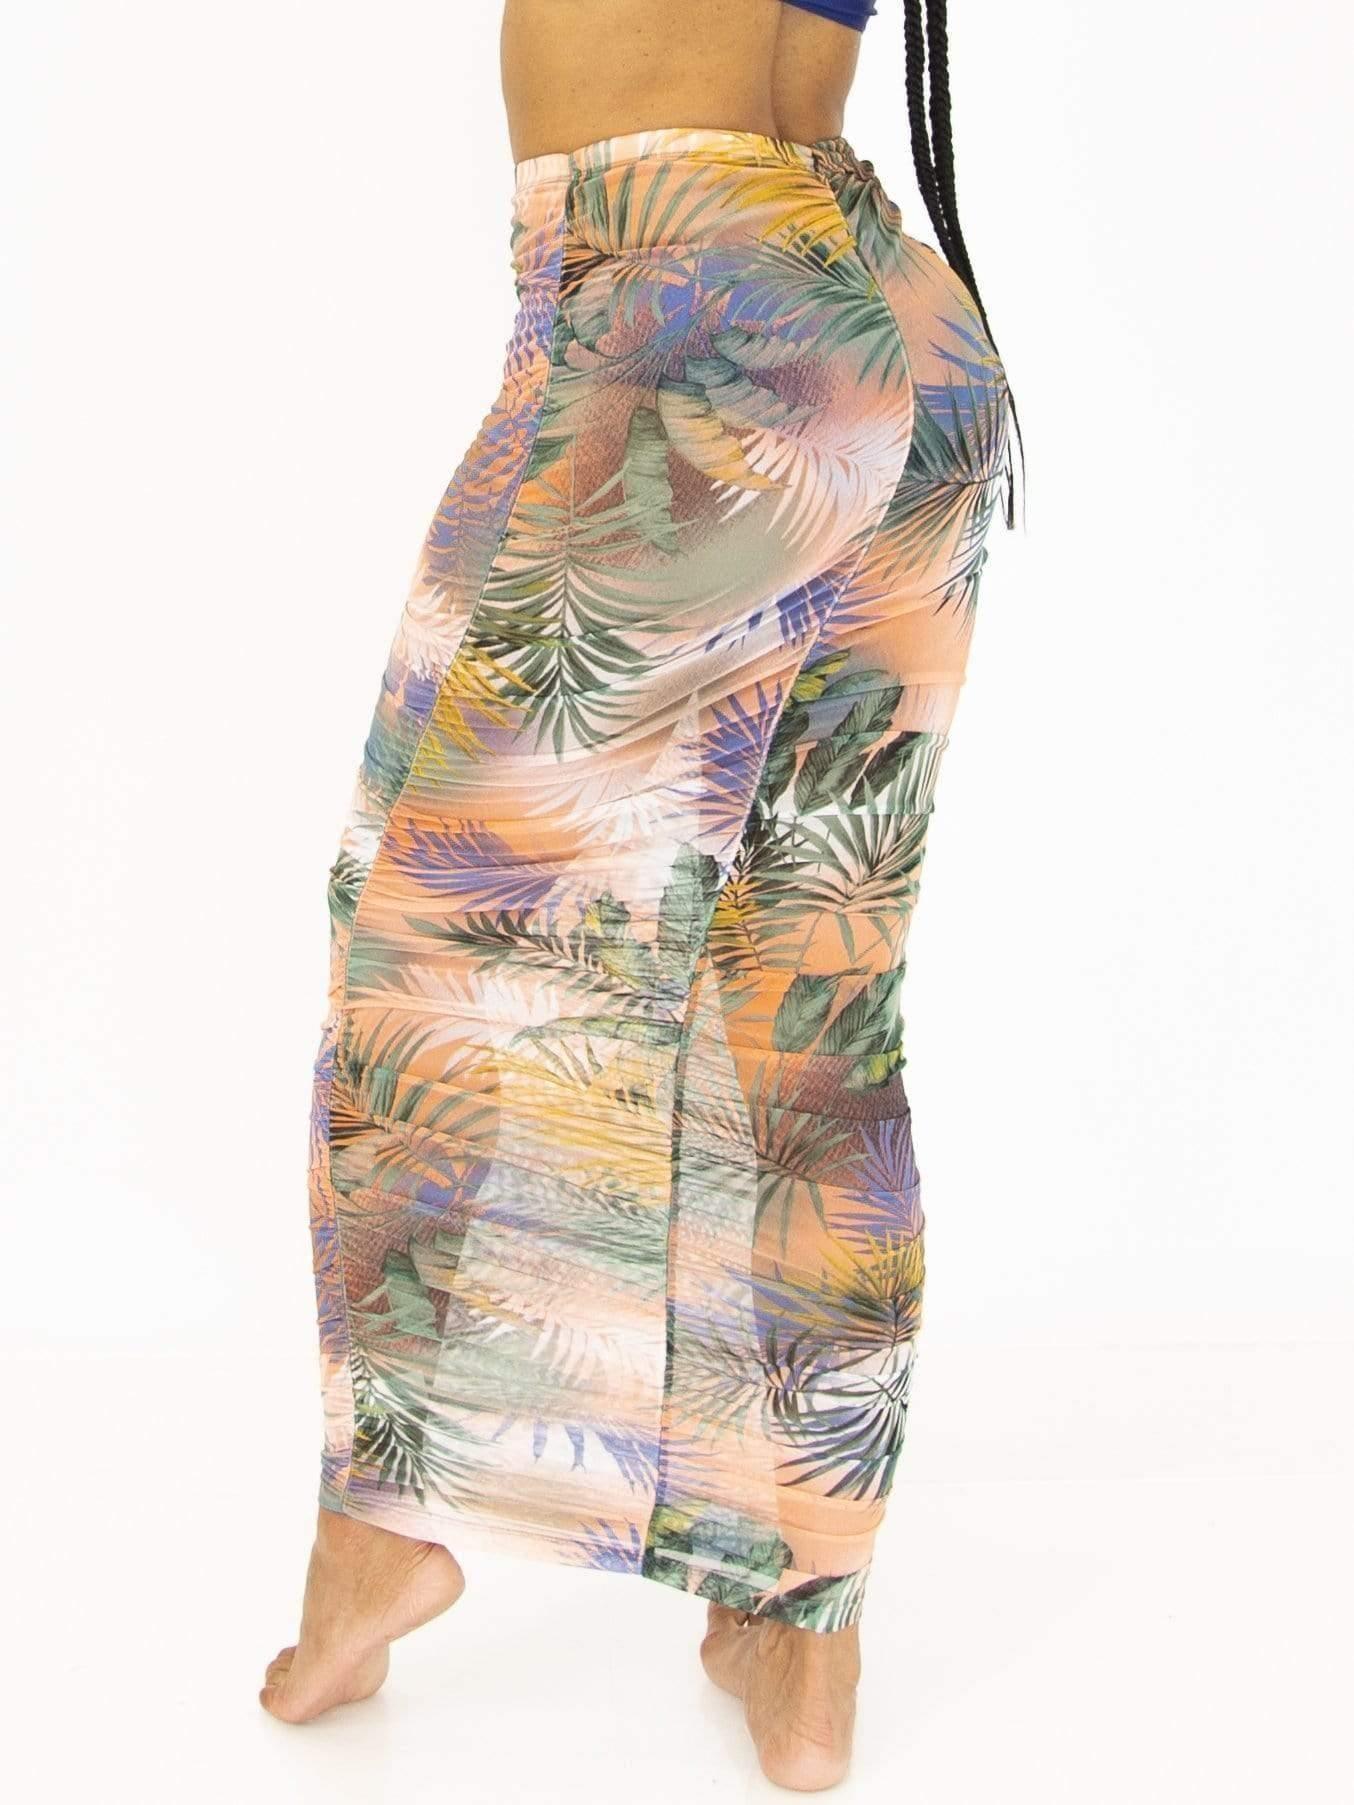 Palm Vibes | Mesh Maxi Skirt SIZE MEDIUM - Statement Piece NY _tab_size-chart, Blossom 2021, Bottom, Bottoms, Brooklyn Boutique, chic, clearance, Colorful, Fall, Fall Fashion, final, final sale, Floral, floral skirt, Maxi Skirt, mesh, mesh skirt, Misses, Multi, not clearance, Pencil Skirt, Ships from USA, skirt, so mesh, SPNY Exclusive, Standard Fall, statement piece, Statement Piece Boutique, statement piece ny, Statement Pieces, Statement Pieces Boutique, Women's Boutique, Workwear Skirts